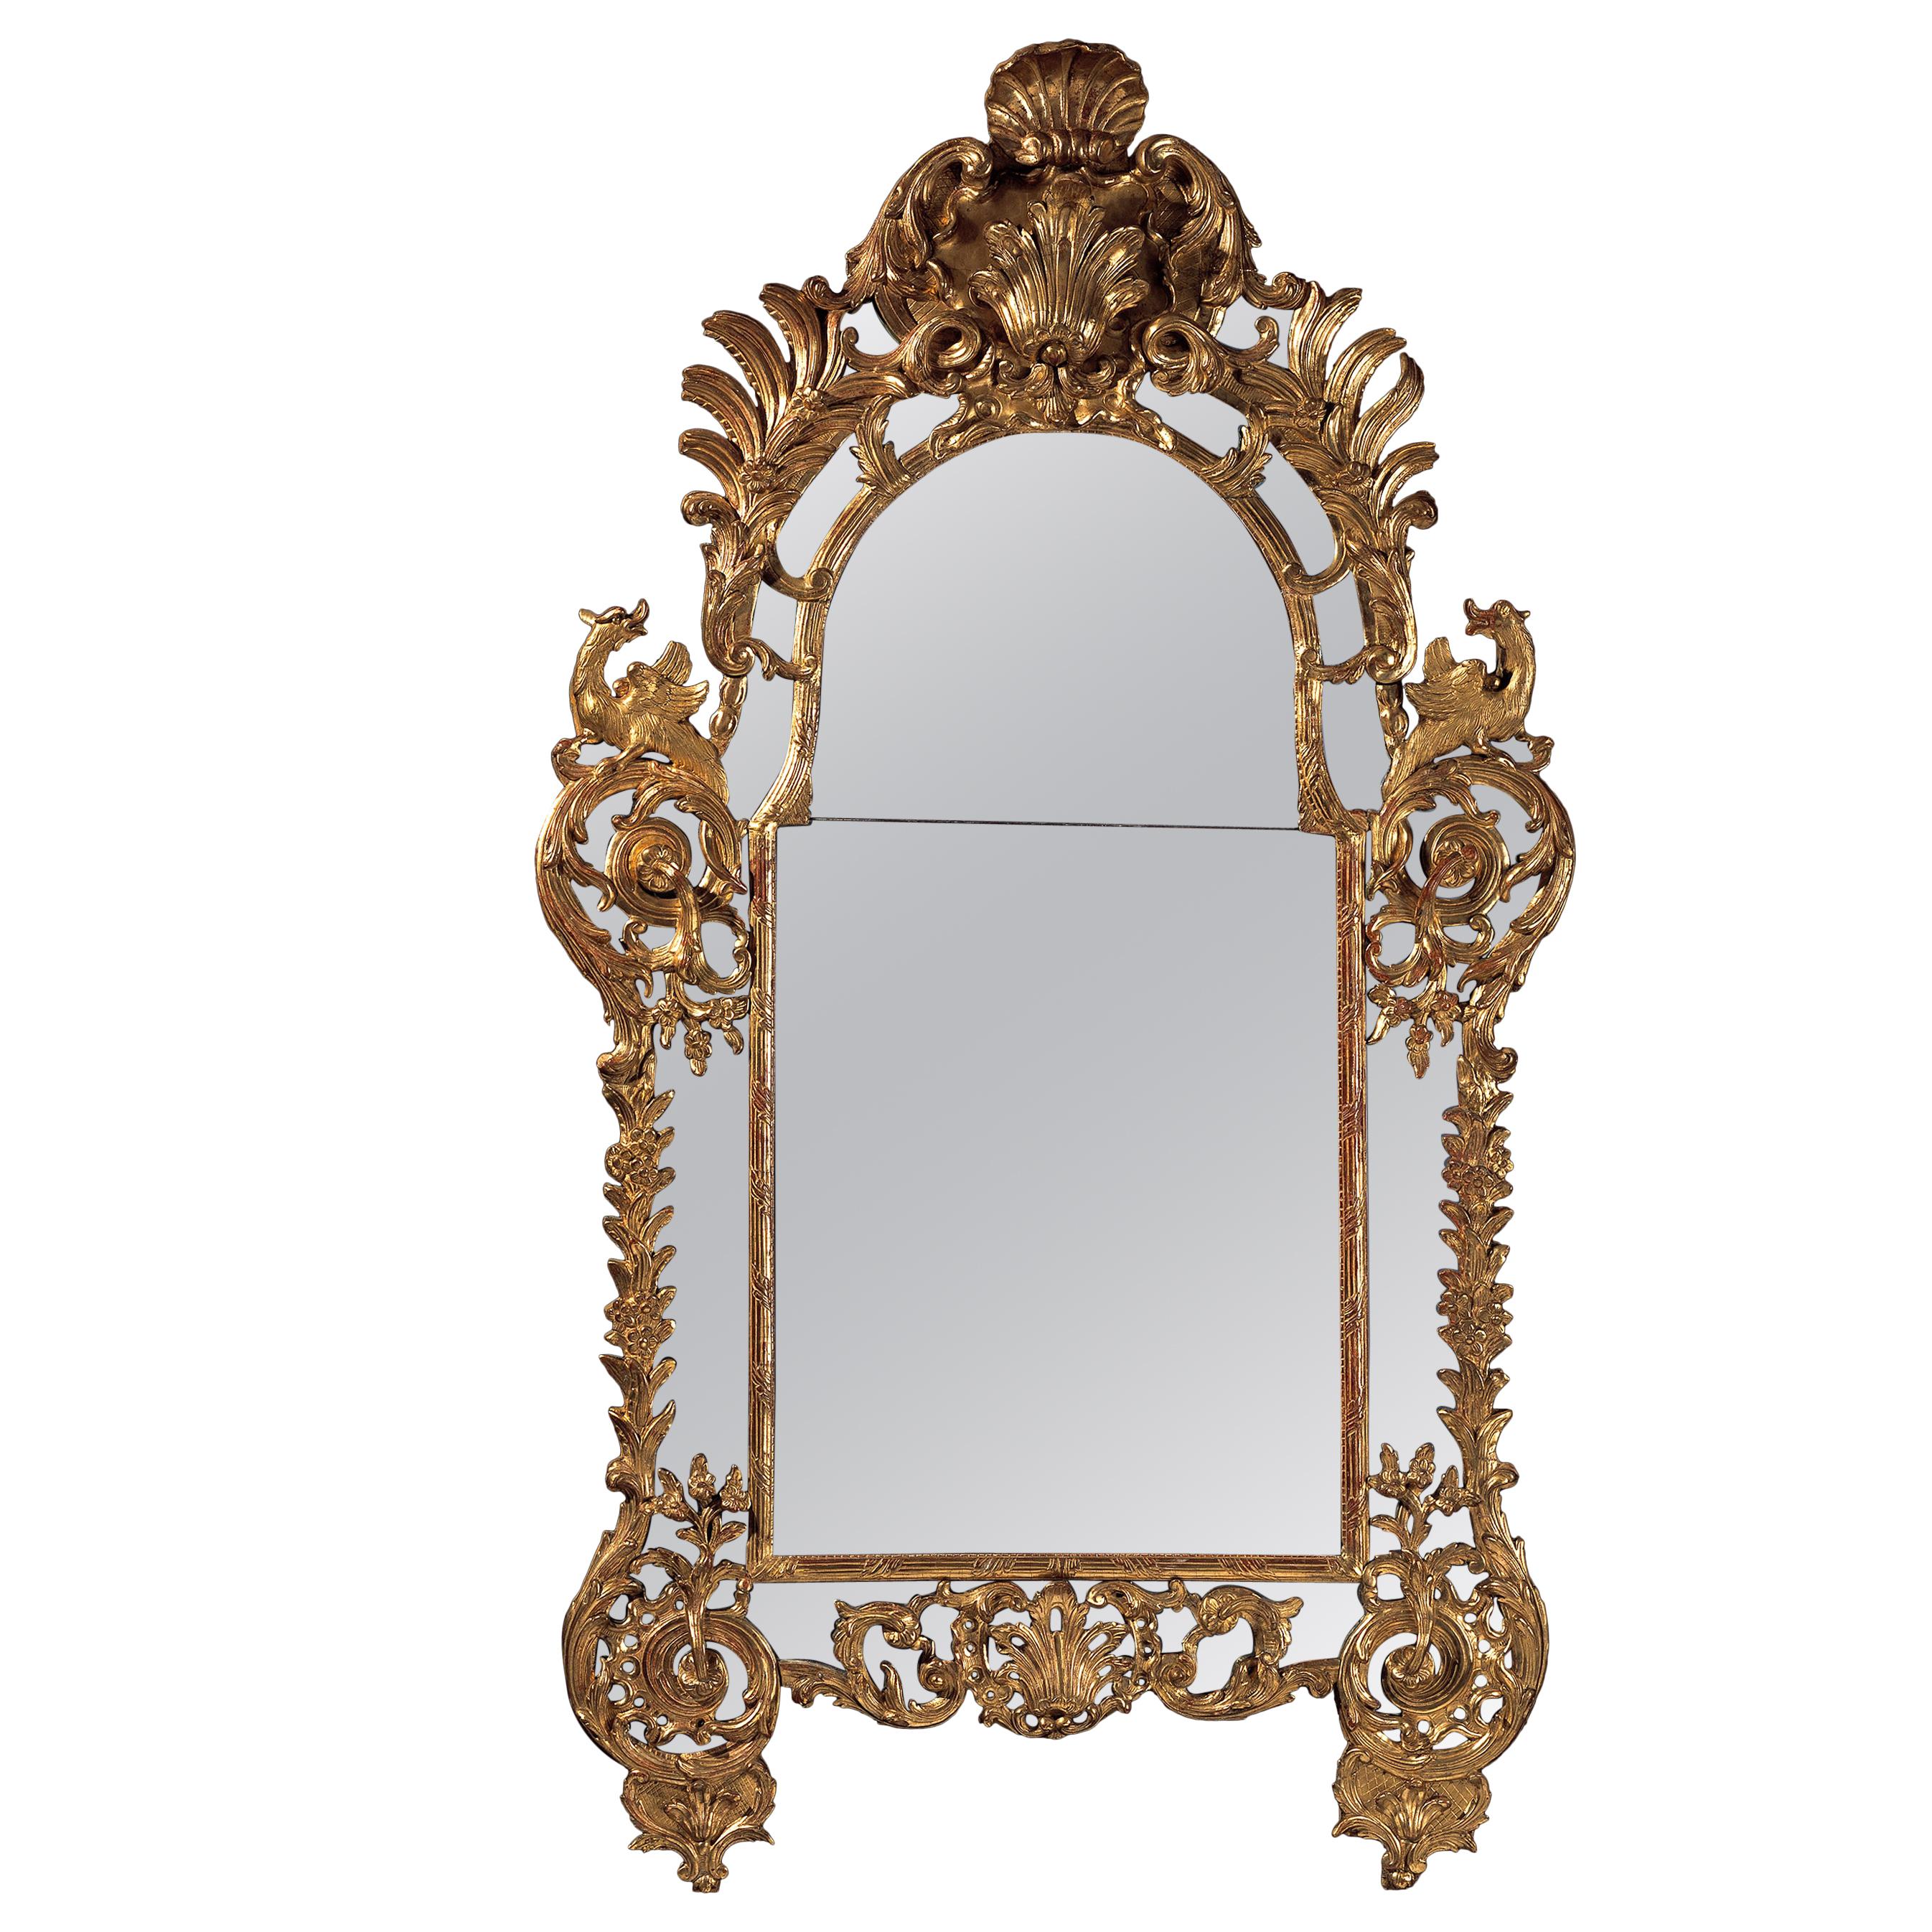 Large Early 18th Century Regence Wall Mirror